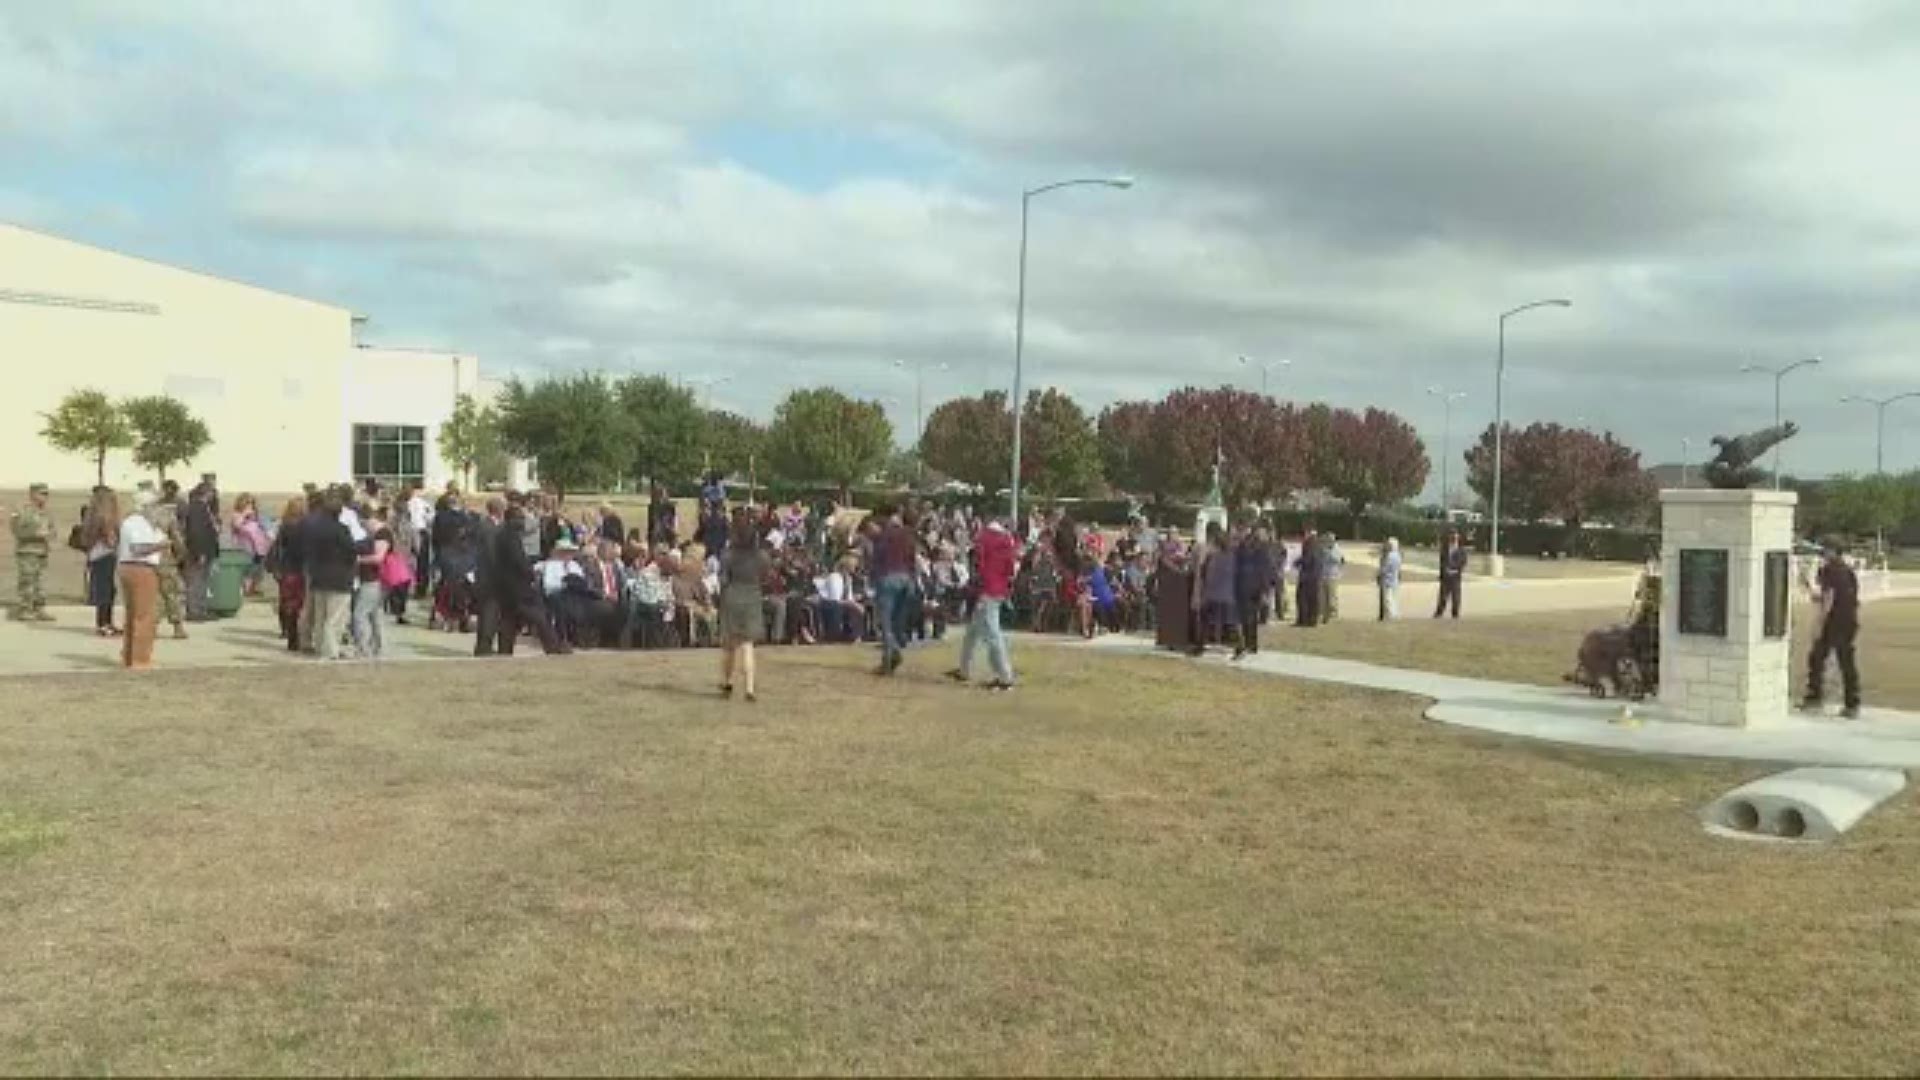 Those who were killed and wounded are honored and remembered in a ceremony at the Ft. Hood Memorial in Killeen.